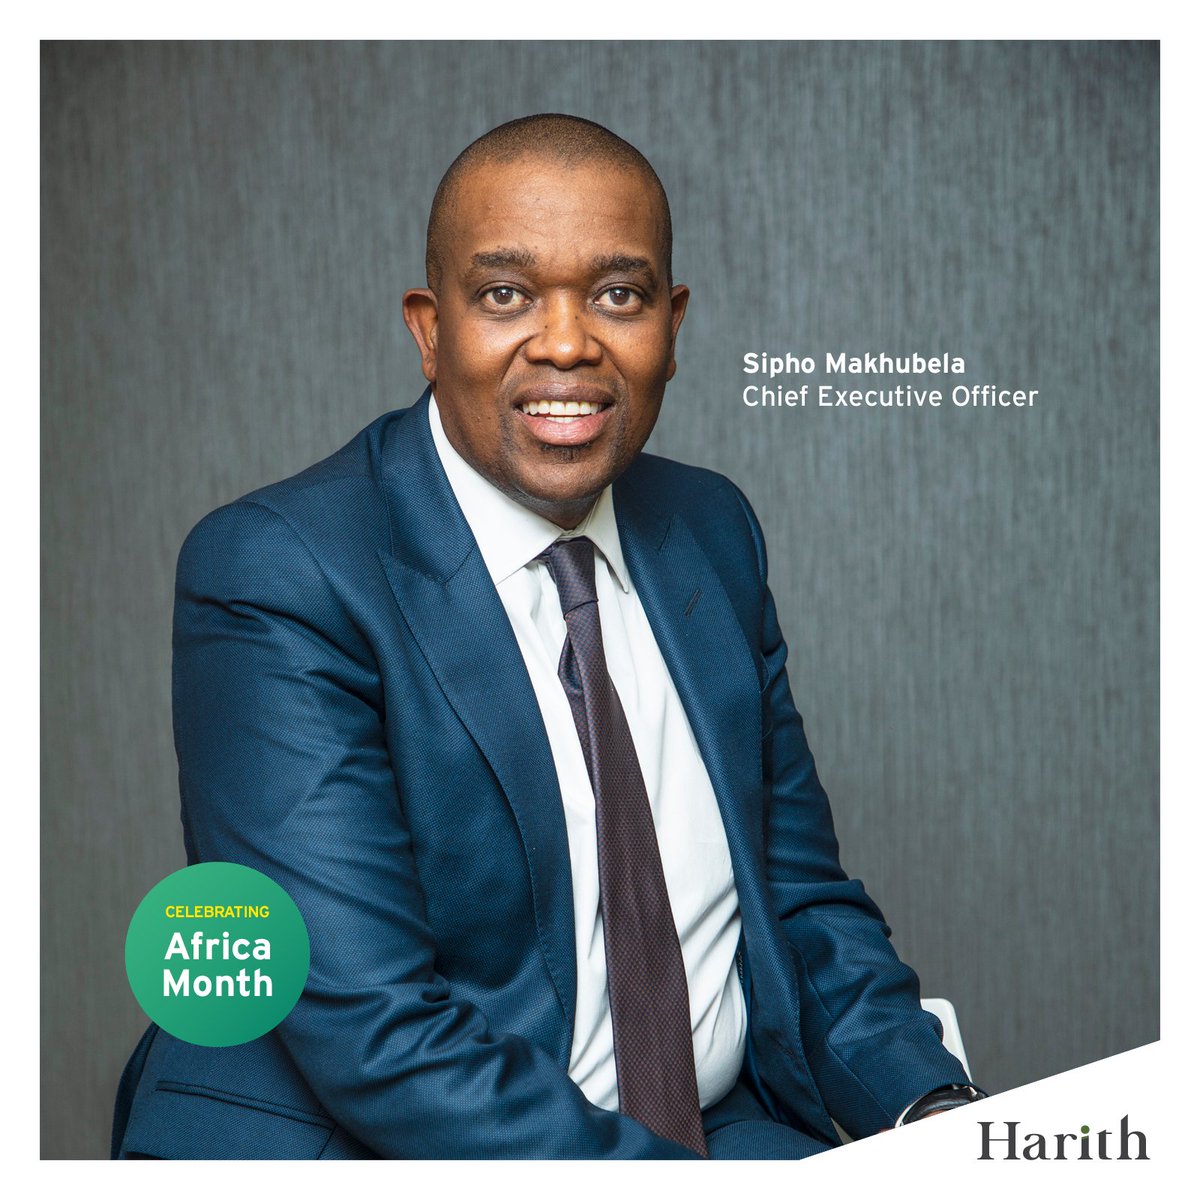 Harith leads Africa's digital infrastructure investment, recently achieving a $320M exit from Nigeria's MainOne. CEO Sipho Makhubela shares insights on this landmark deal. Read more: peafricanews.com/profiting-digi… #InvestmentInsights #AfricanInvestment #Harith